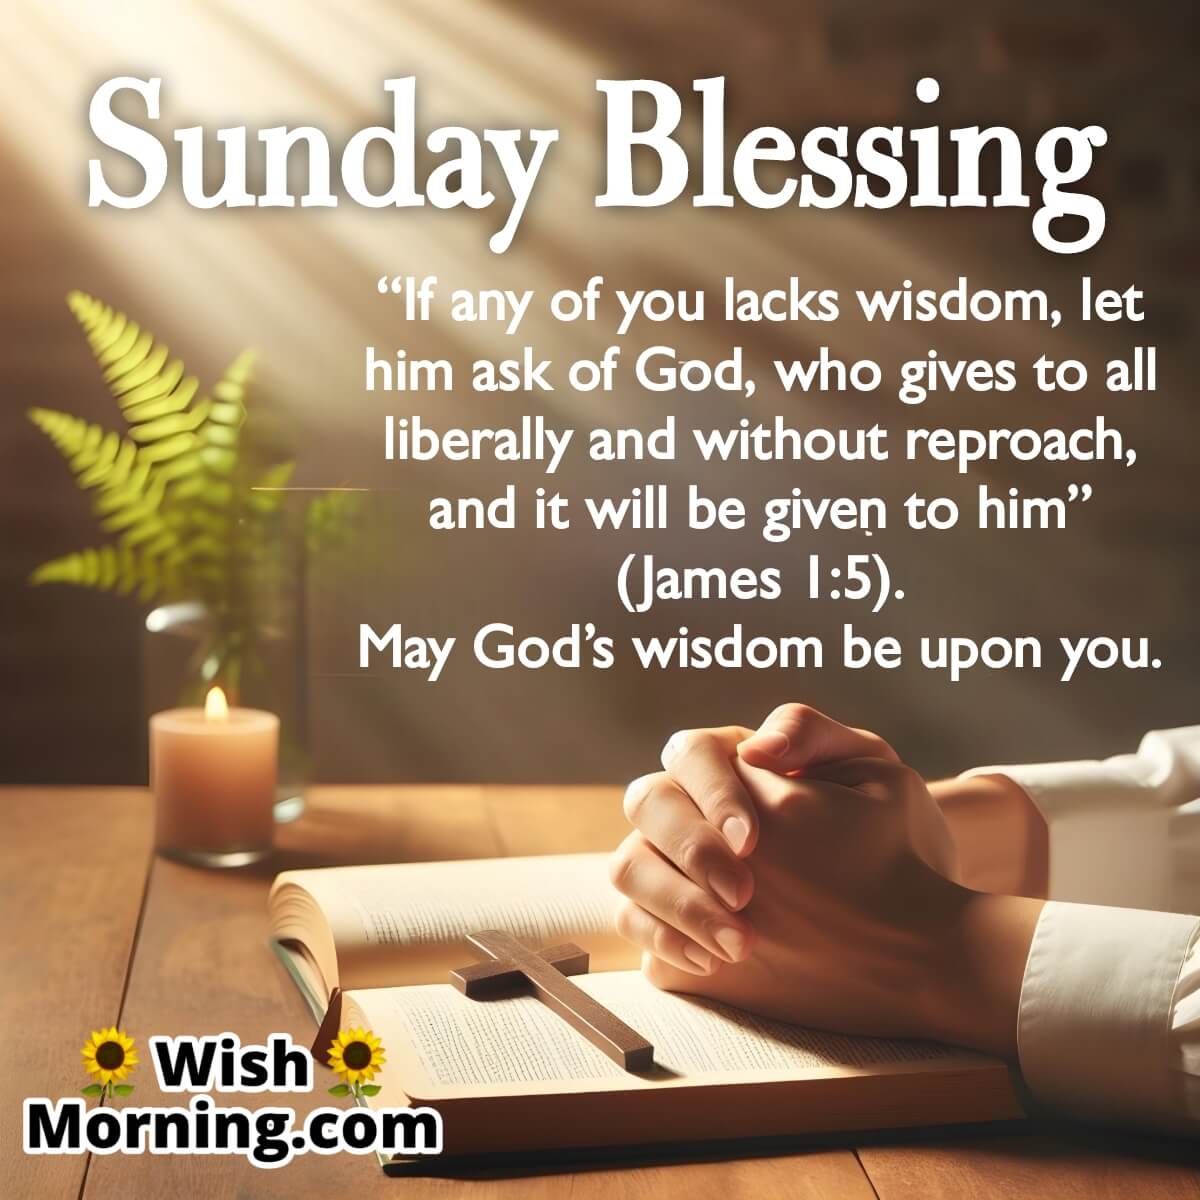 Sunday Blessing Images